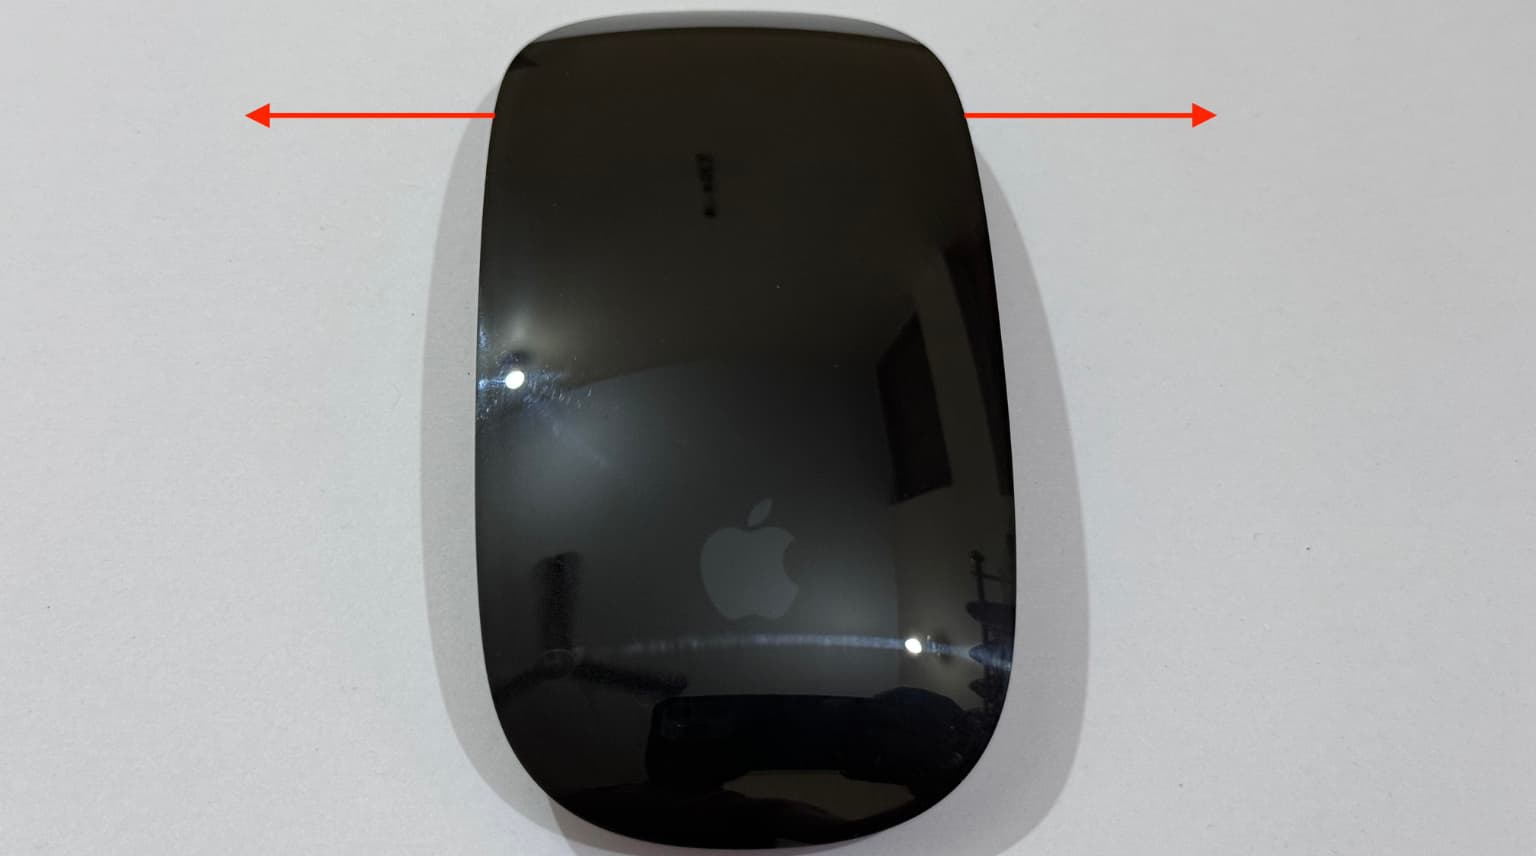 Apple Magic Mouse with two arrows showing that its top part moves left right very slightly